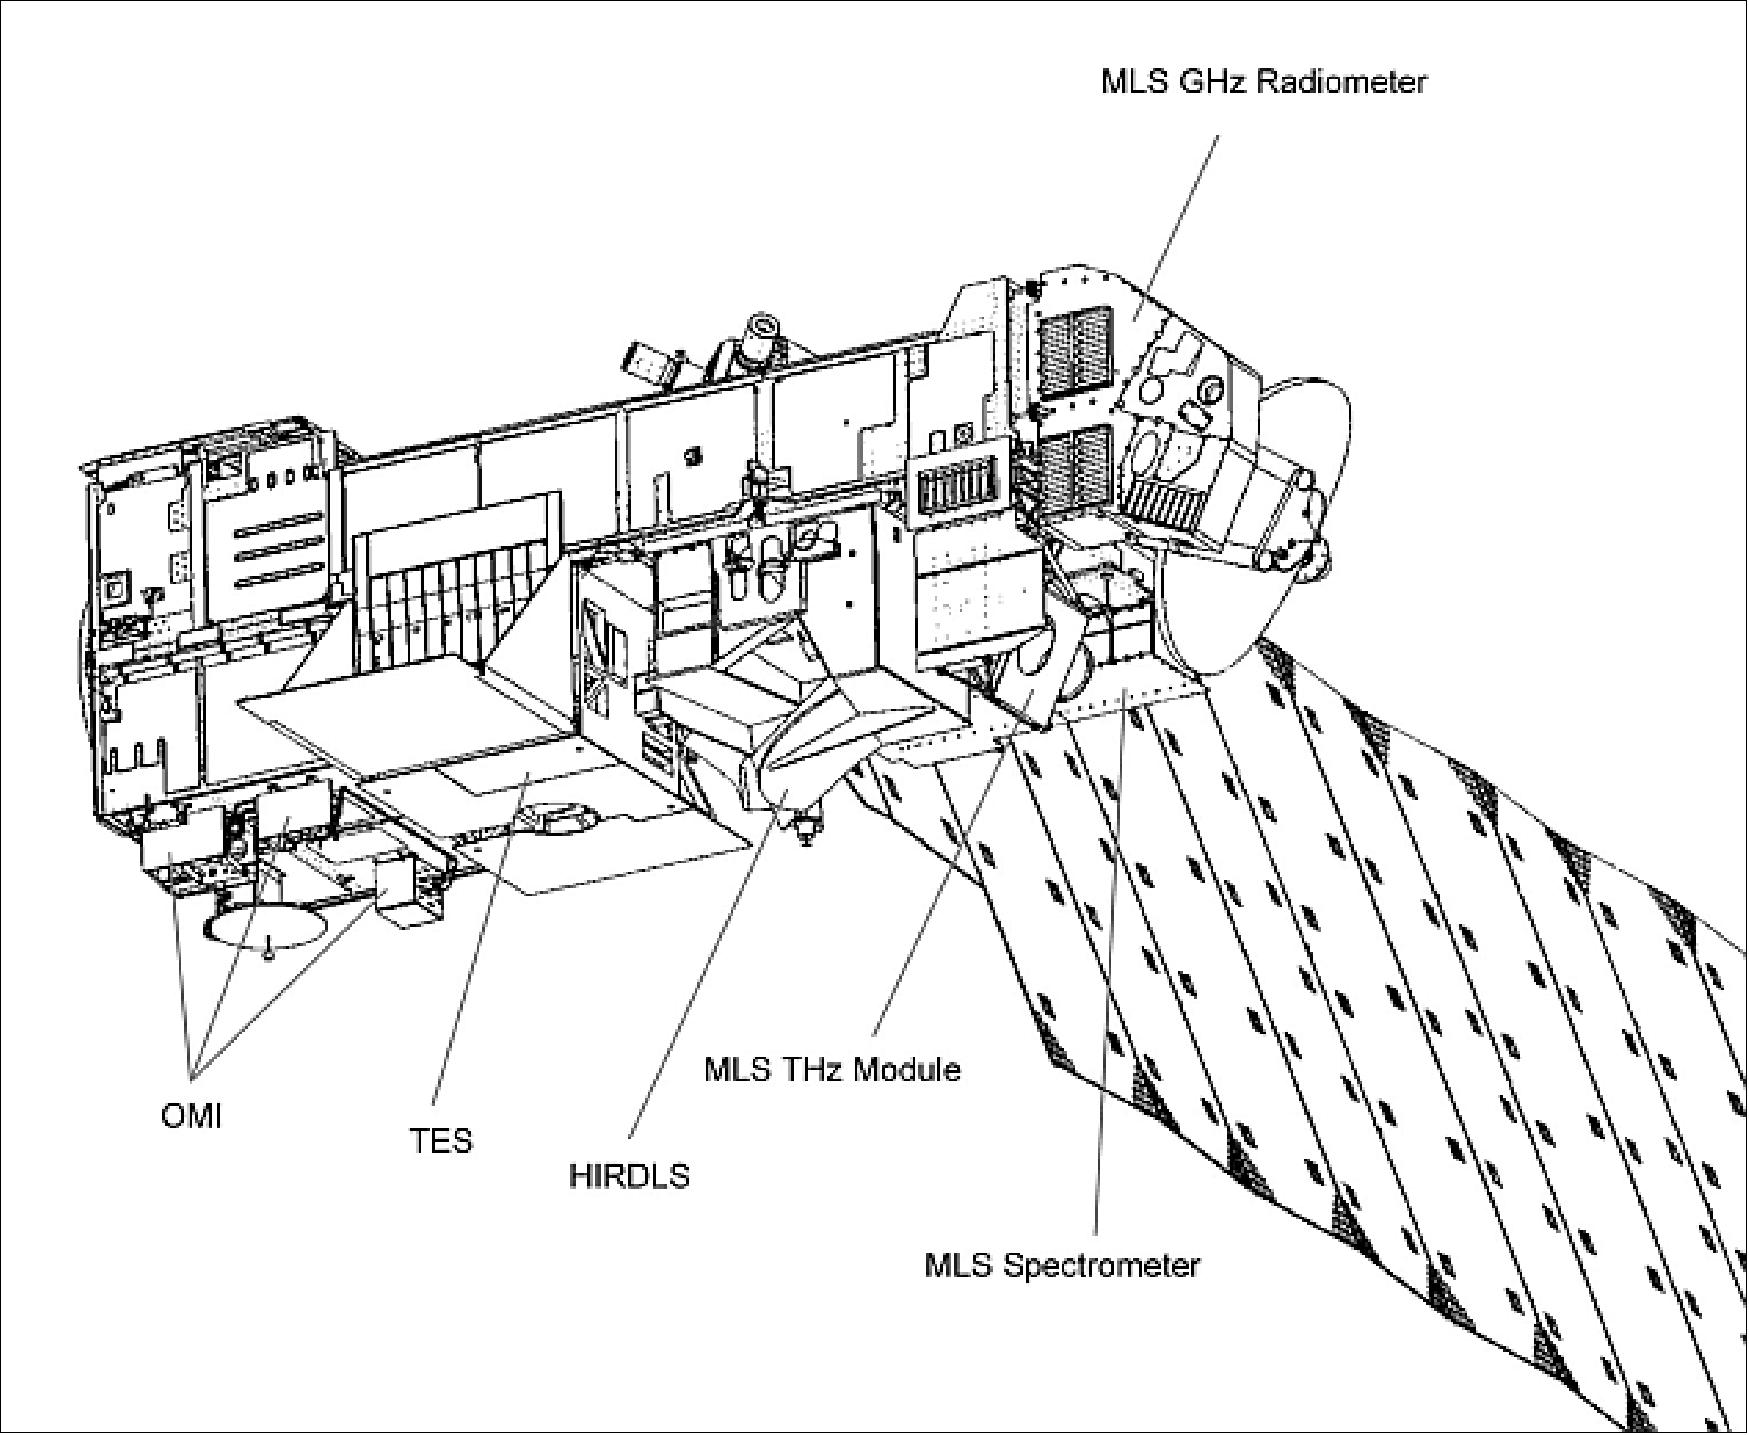 Figure 2: Illustration of the Aura spacecraft (image credit: NGST)